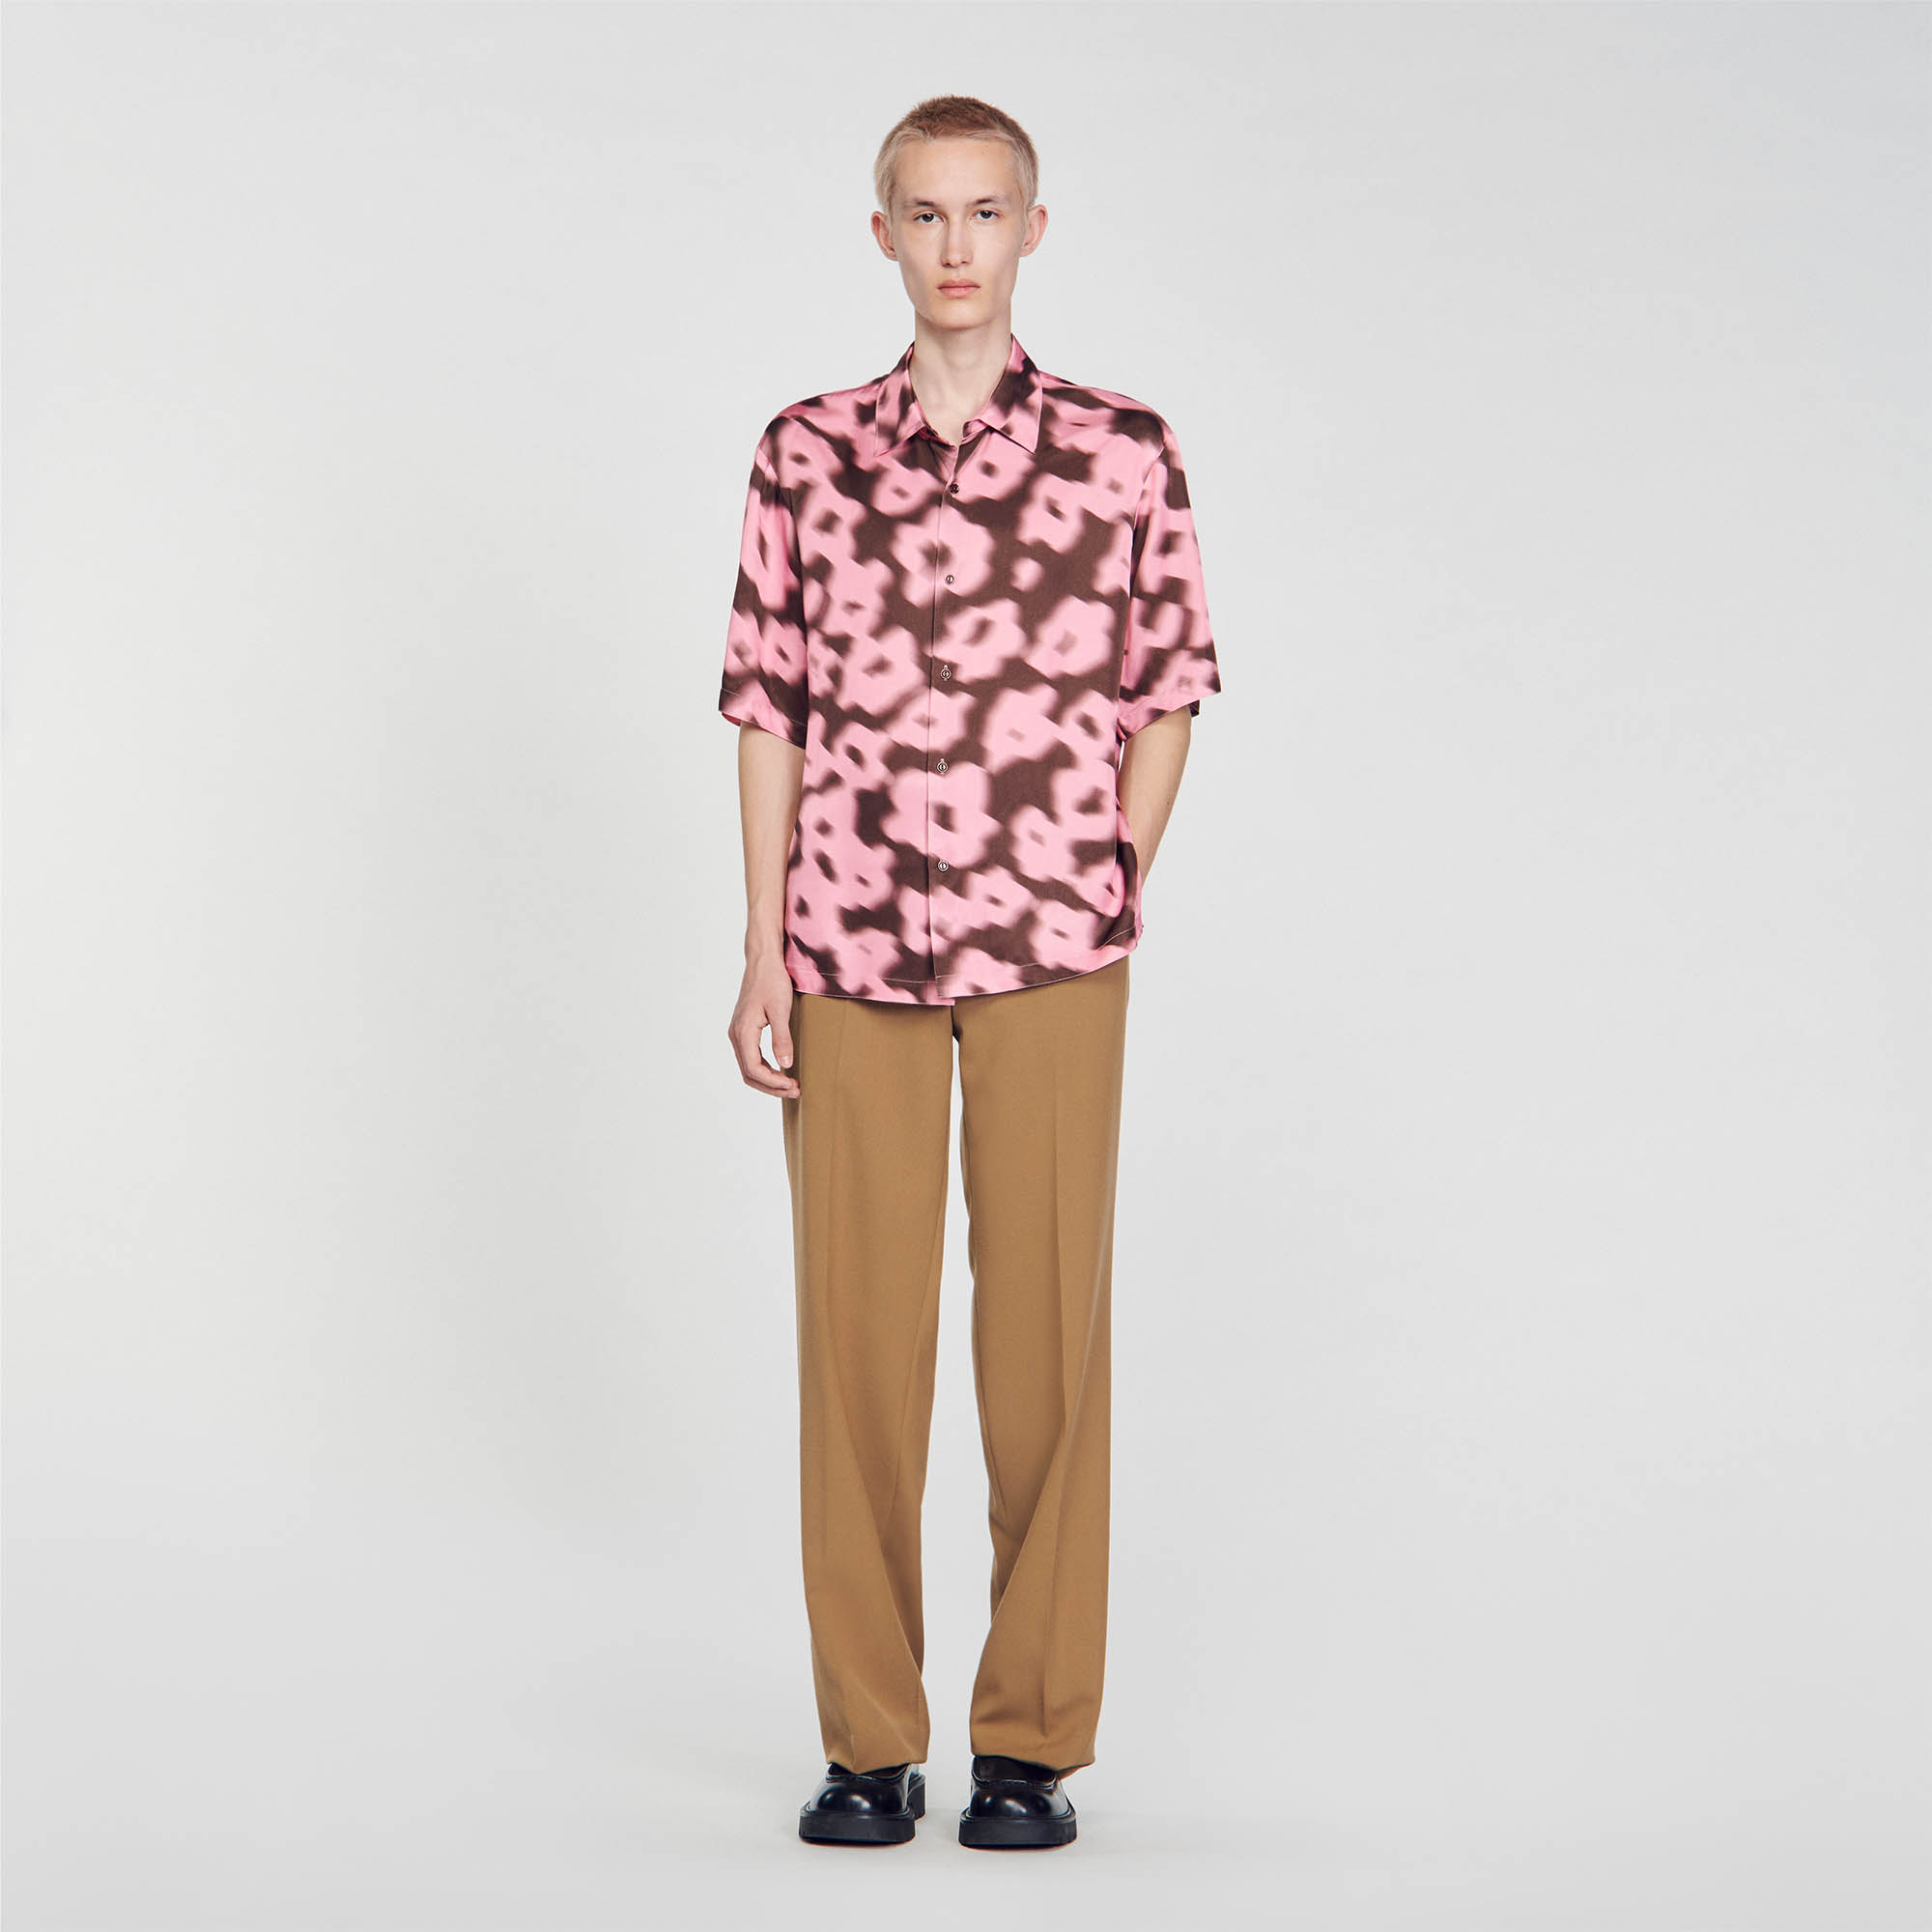 Sandro viscose Oversized shirt with a blurred floral print fitted with a collar, button fastening and short sleeves